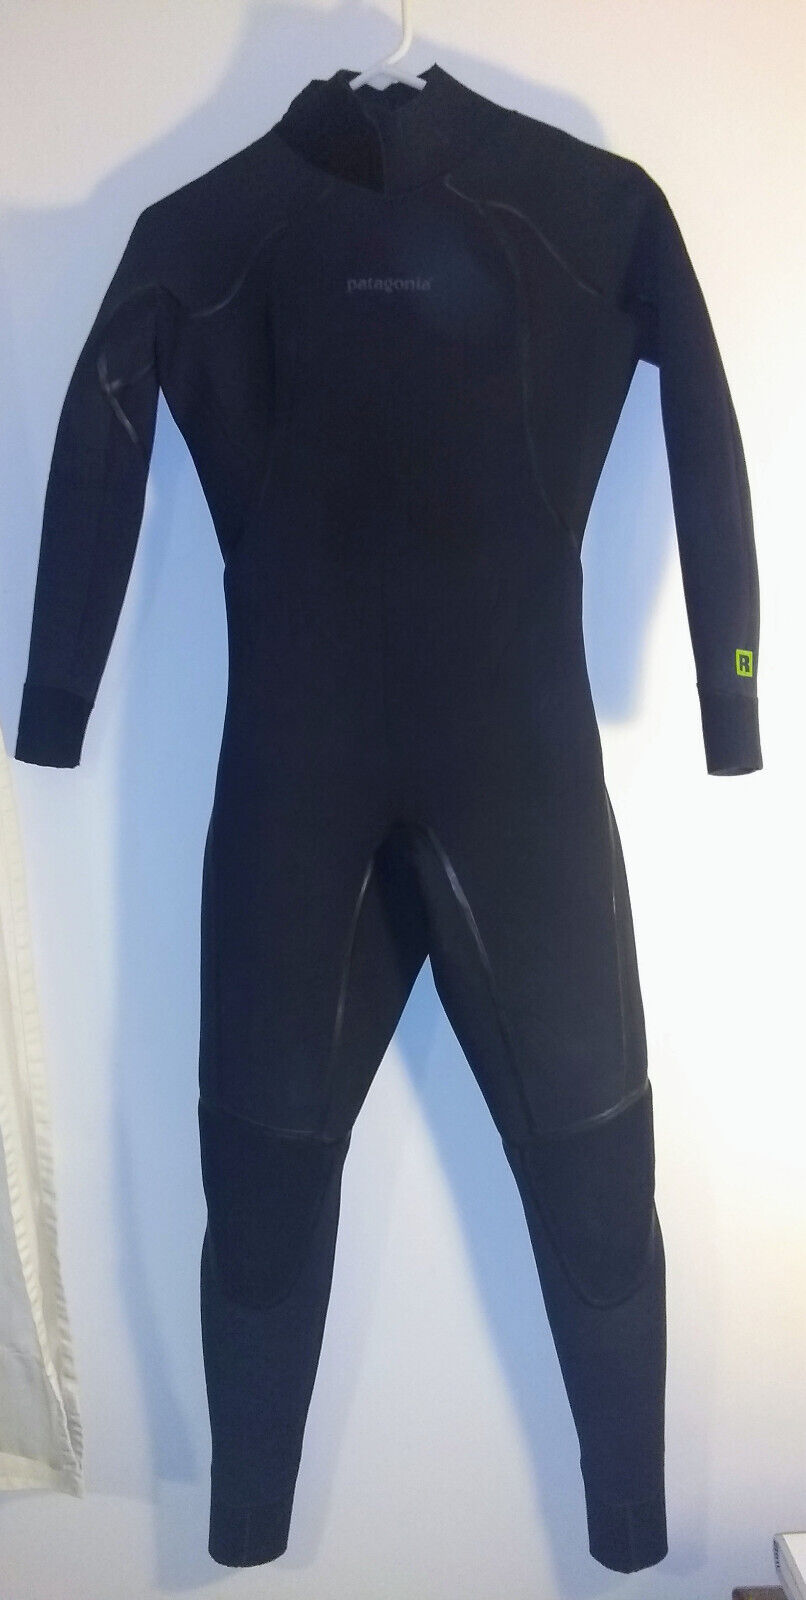 Patagonia Womens Wetsuit R2 Size 6 Surf Roxy Hurley Billabong Ripcurl